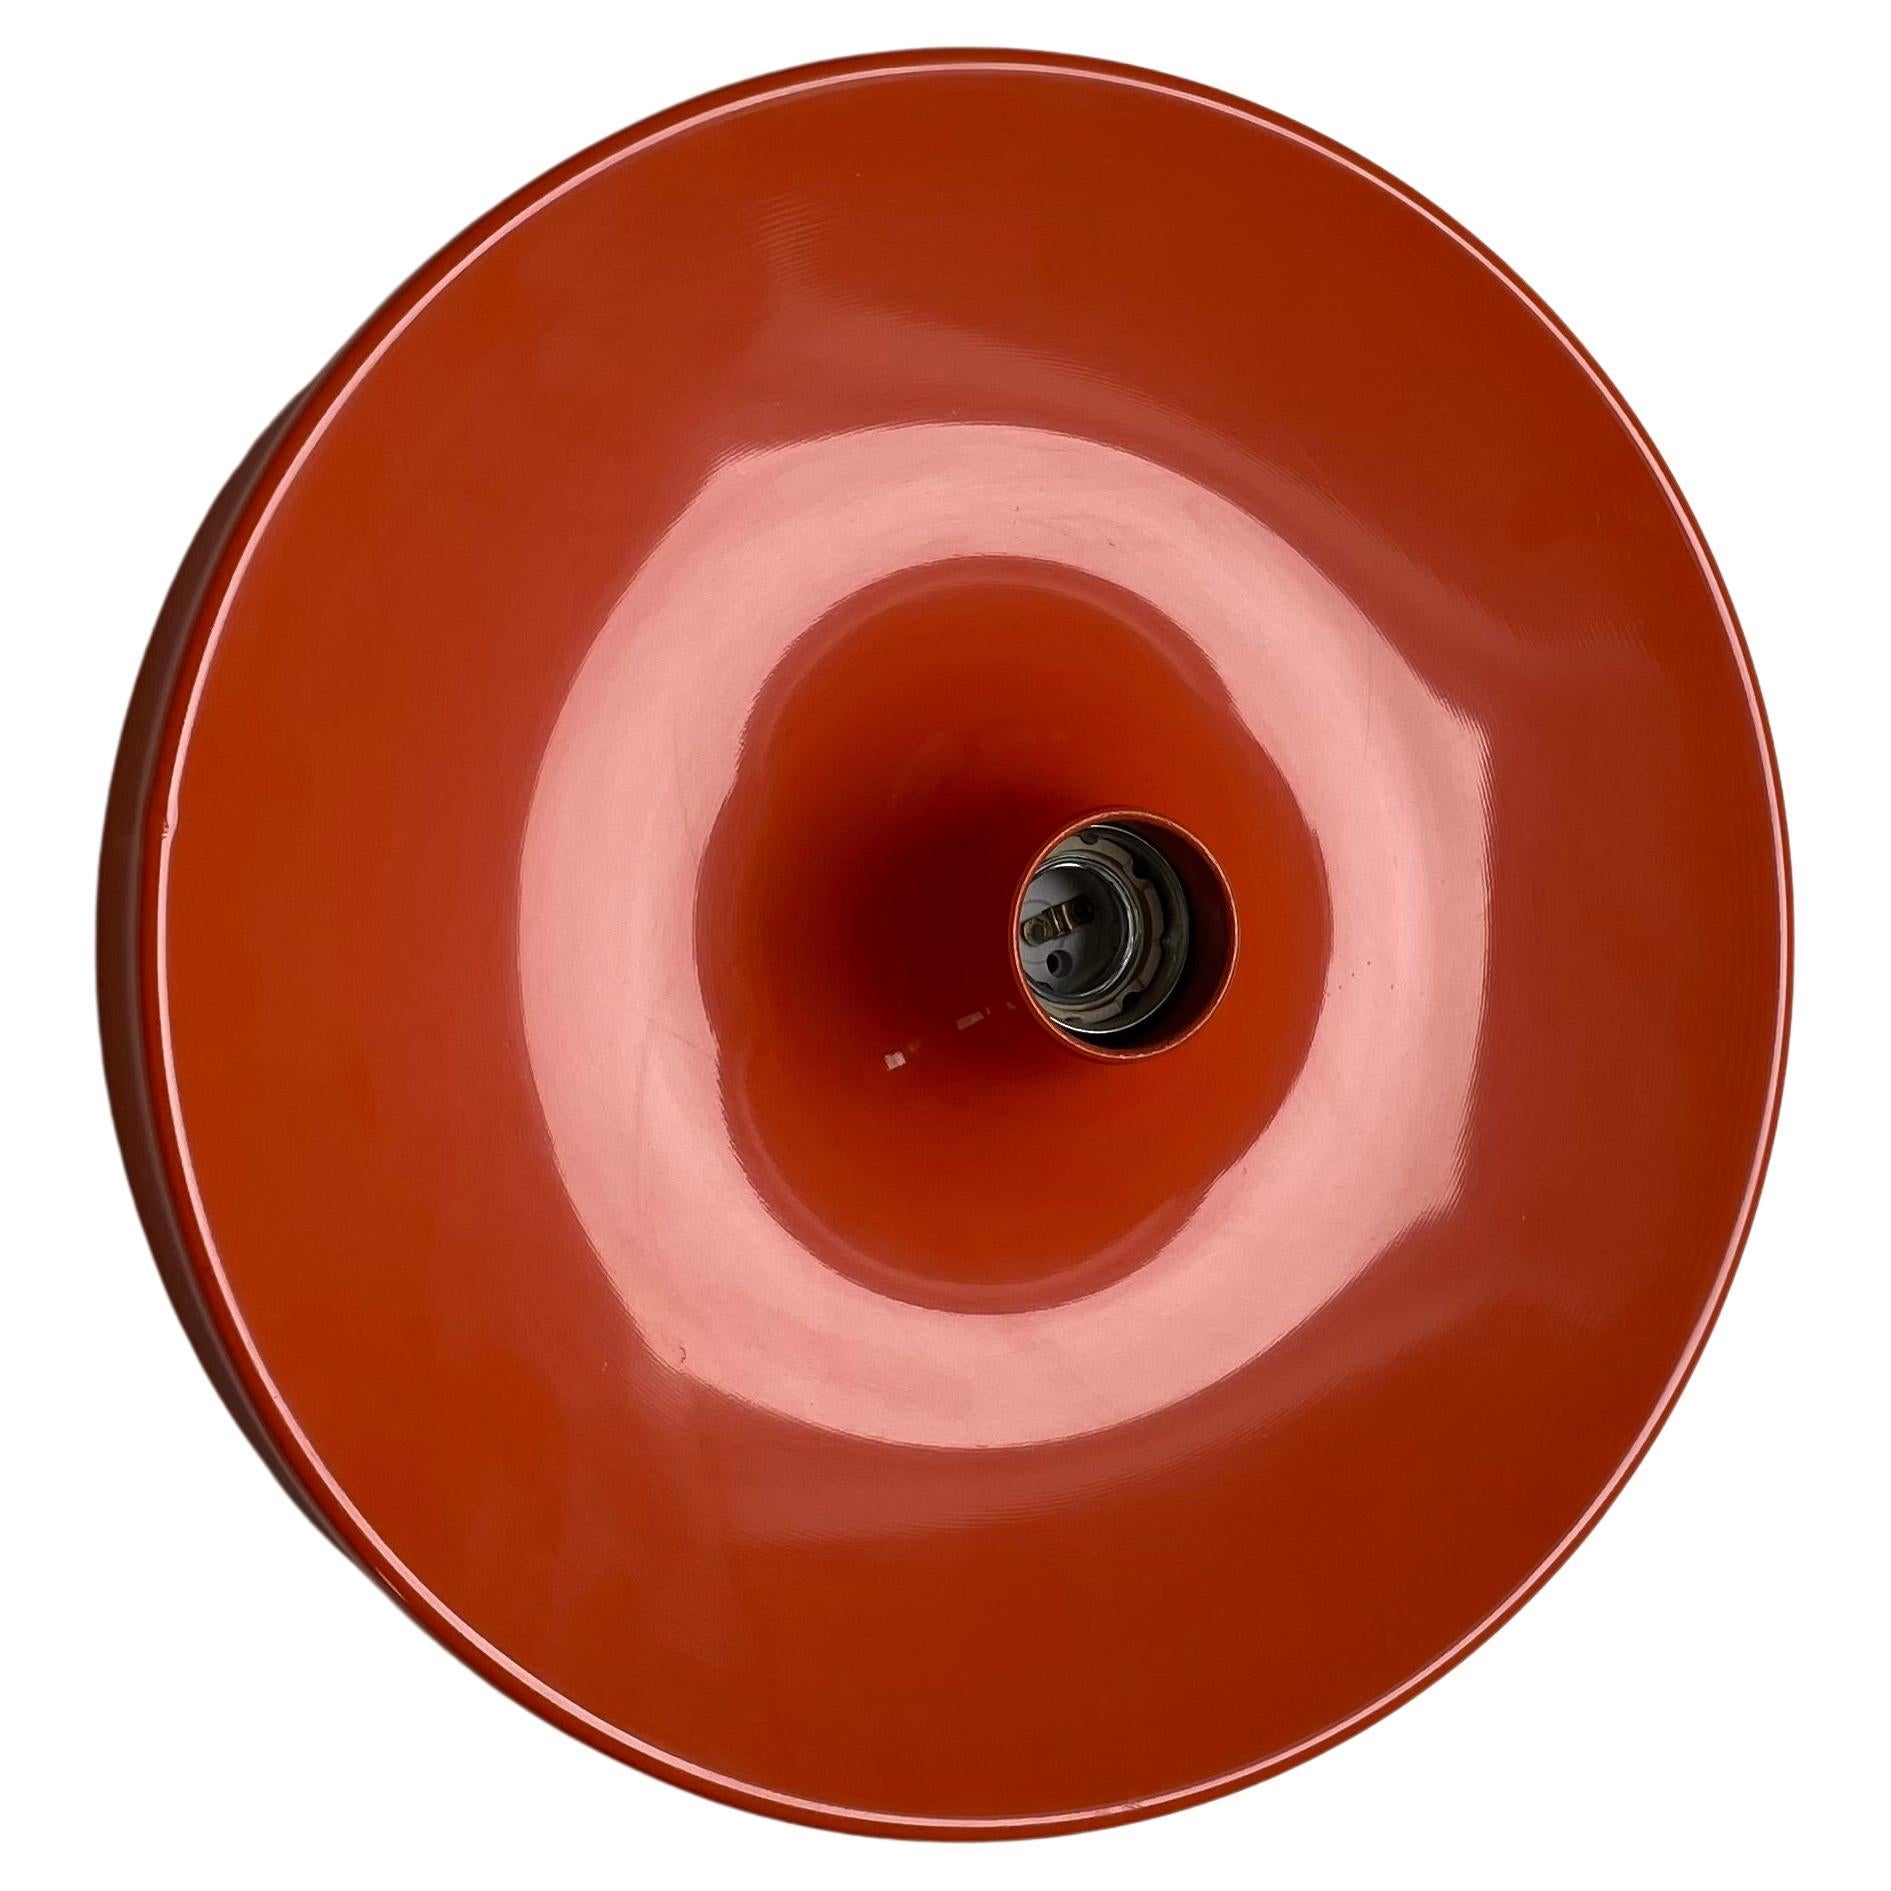 Rare orange 34cm Charlotte Perriand Style Disc Wall Light by Staff, Germany 1970 For Sale